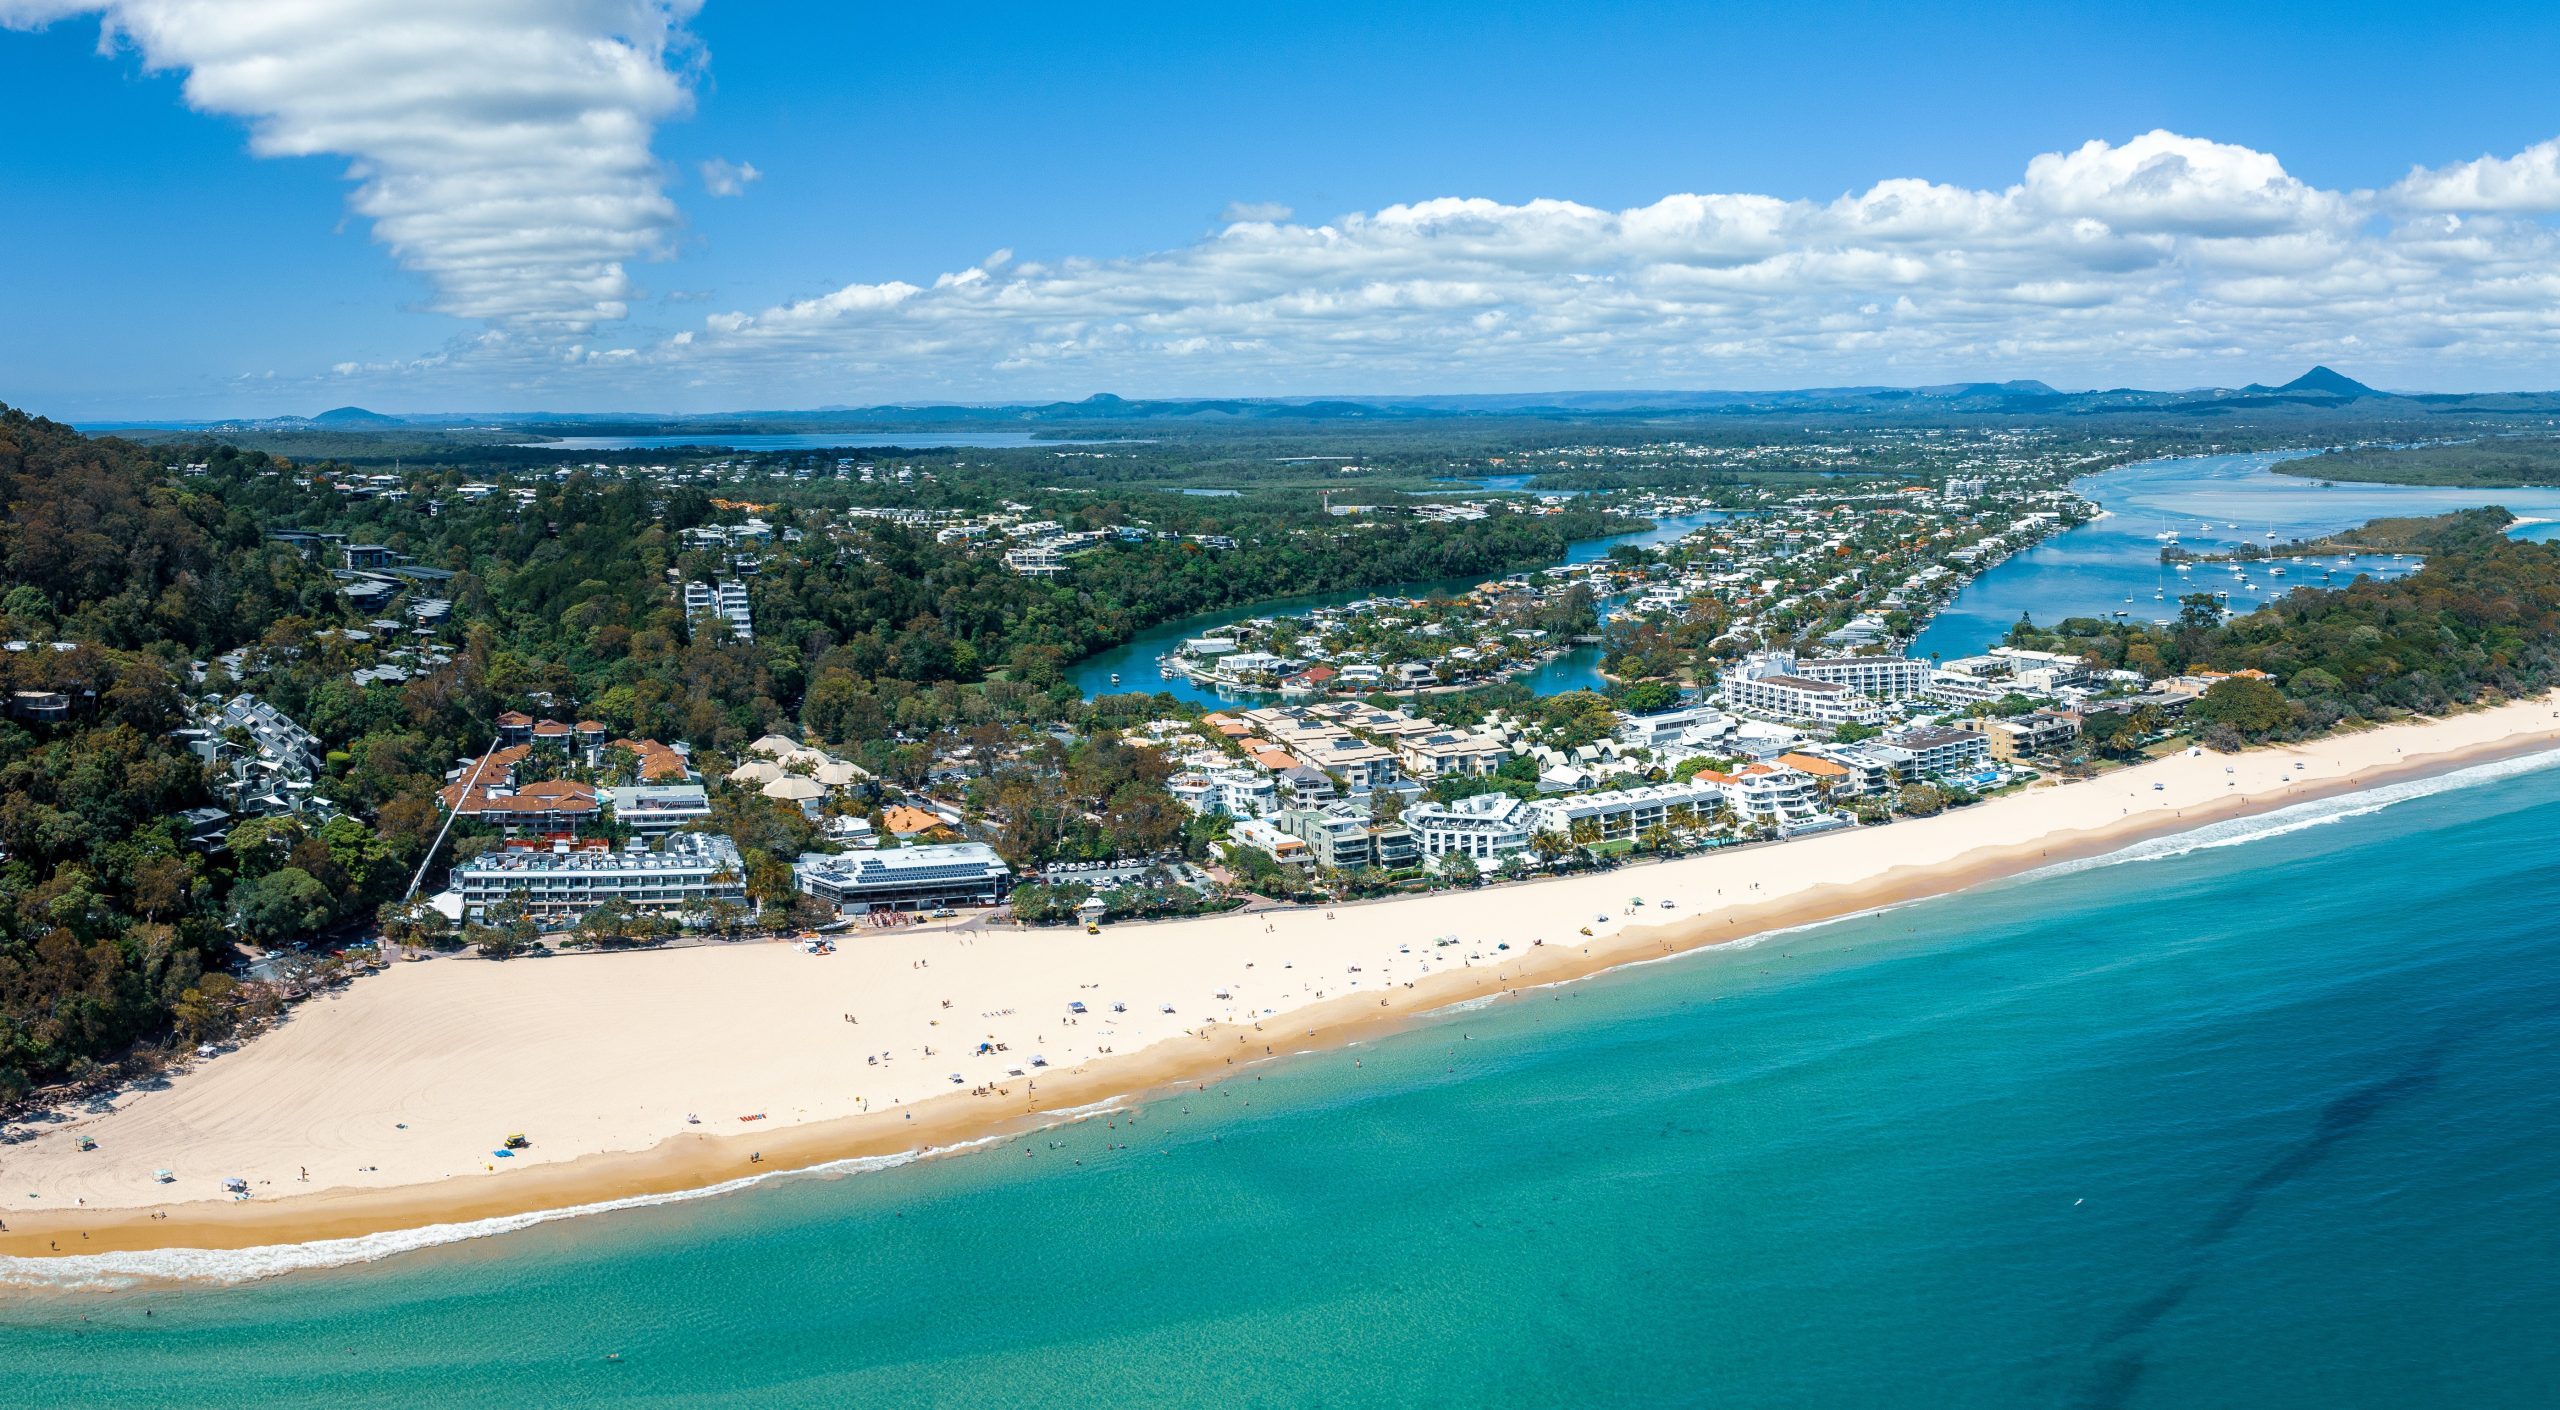 Noosa rates rise, new fees in ‘unprecedented’ times